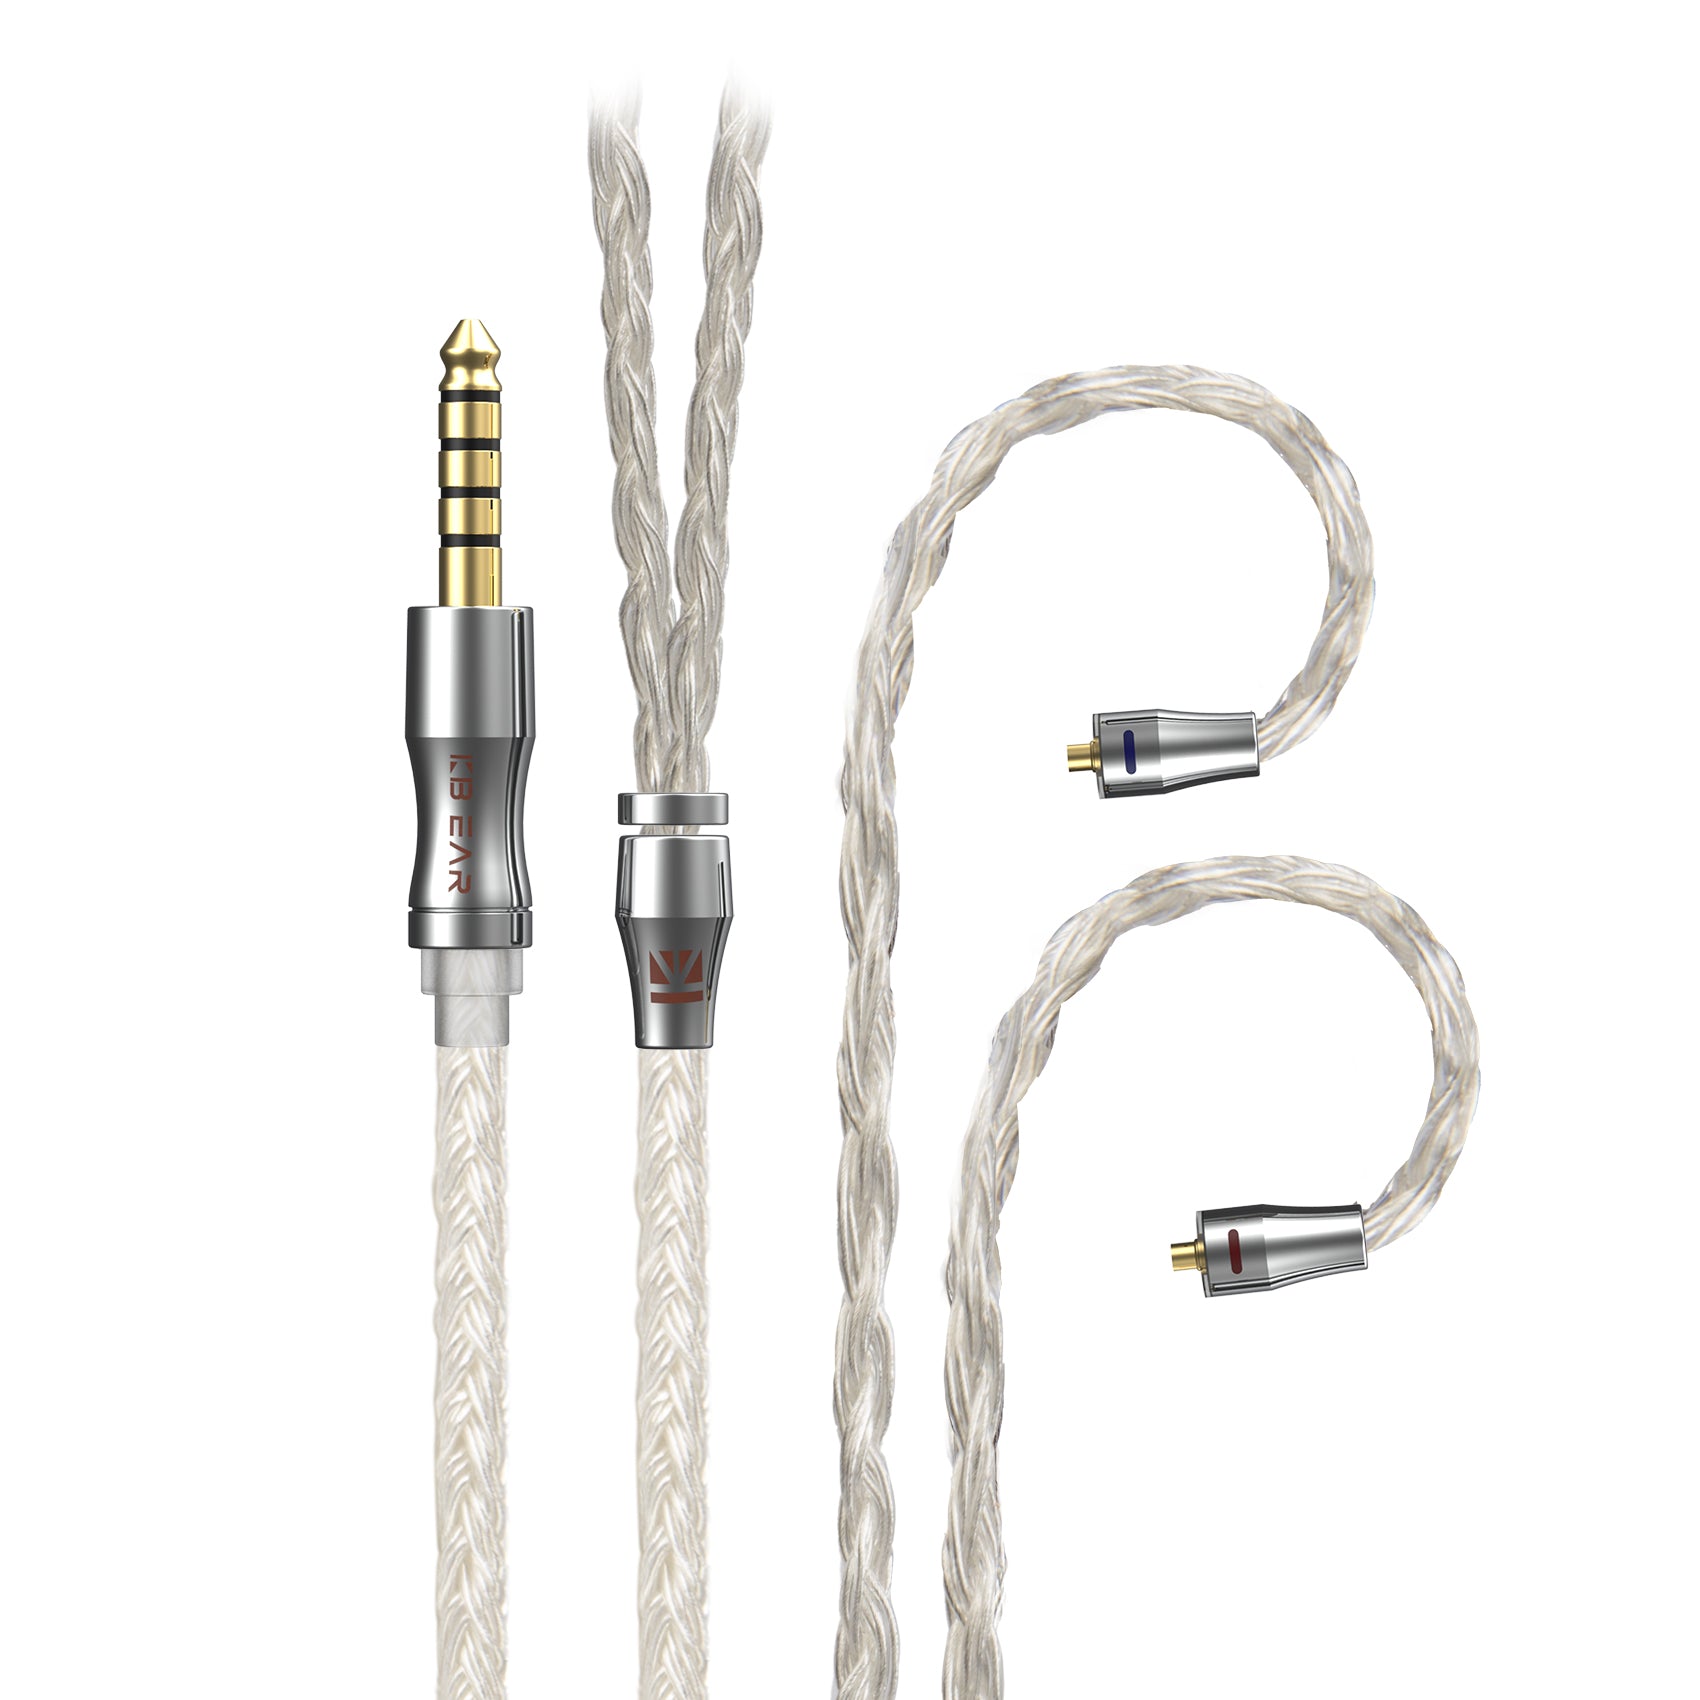 KBEAR Expansion 24 Core 4N Silver Plated Cable